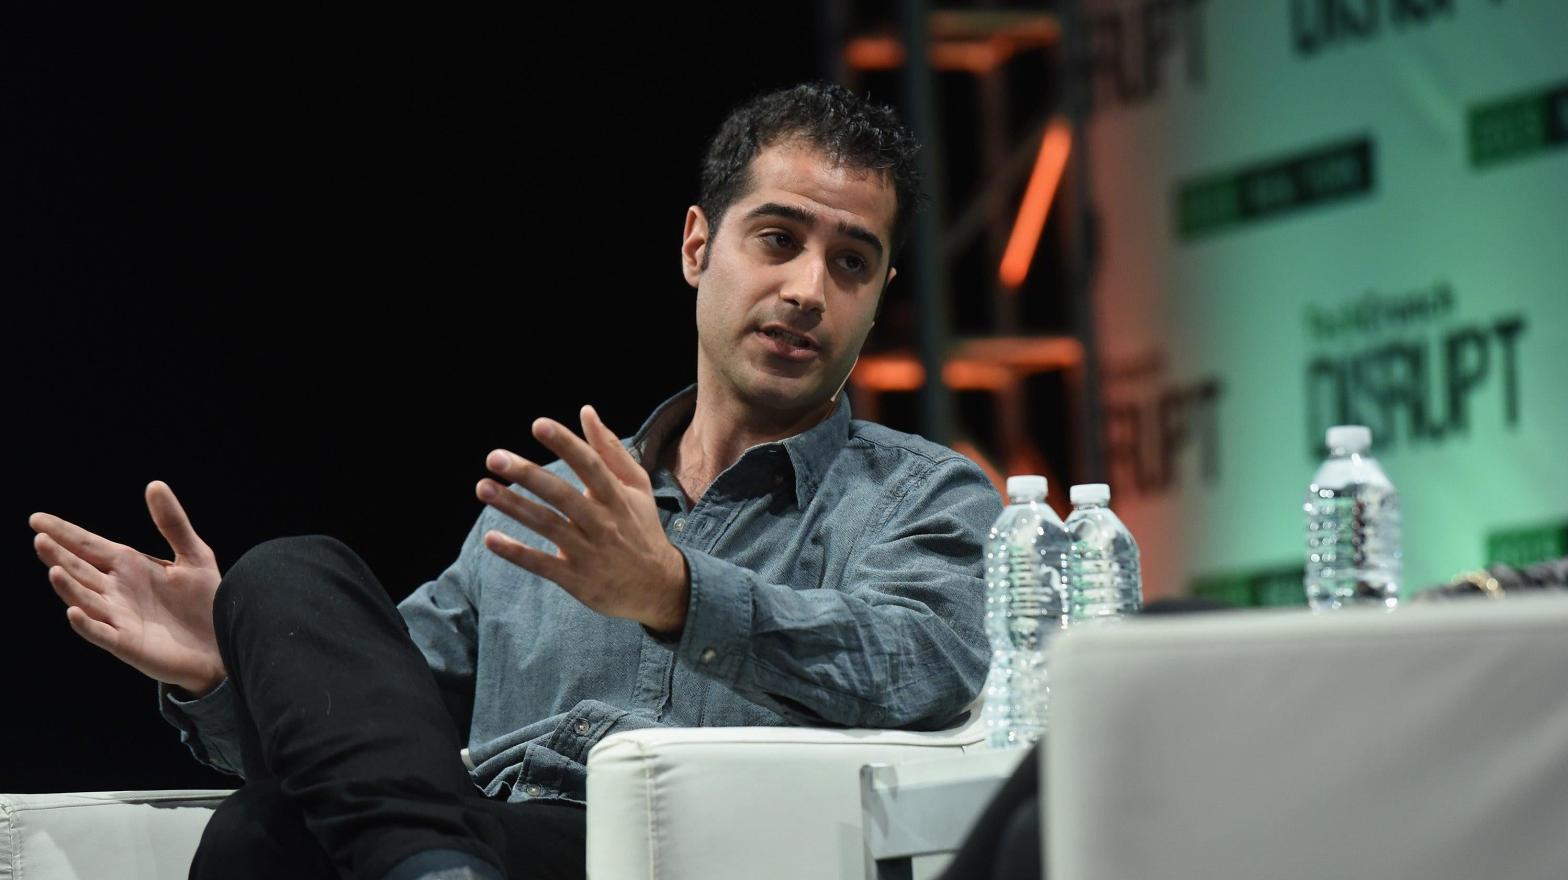 Kayvon Beykpour joined the company in 2015 when it acquired Periscope. (Photo: Noam Galai, Getty Images)